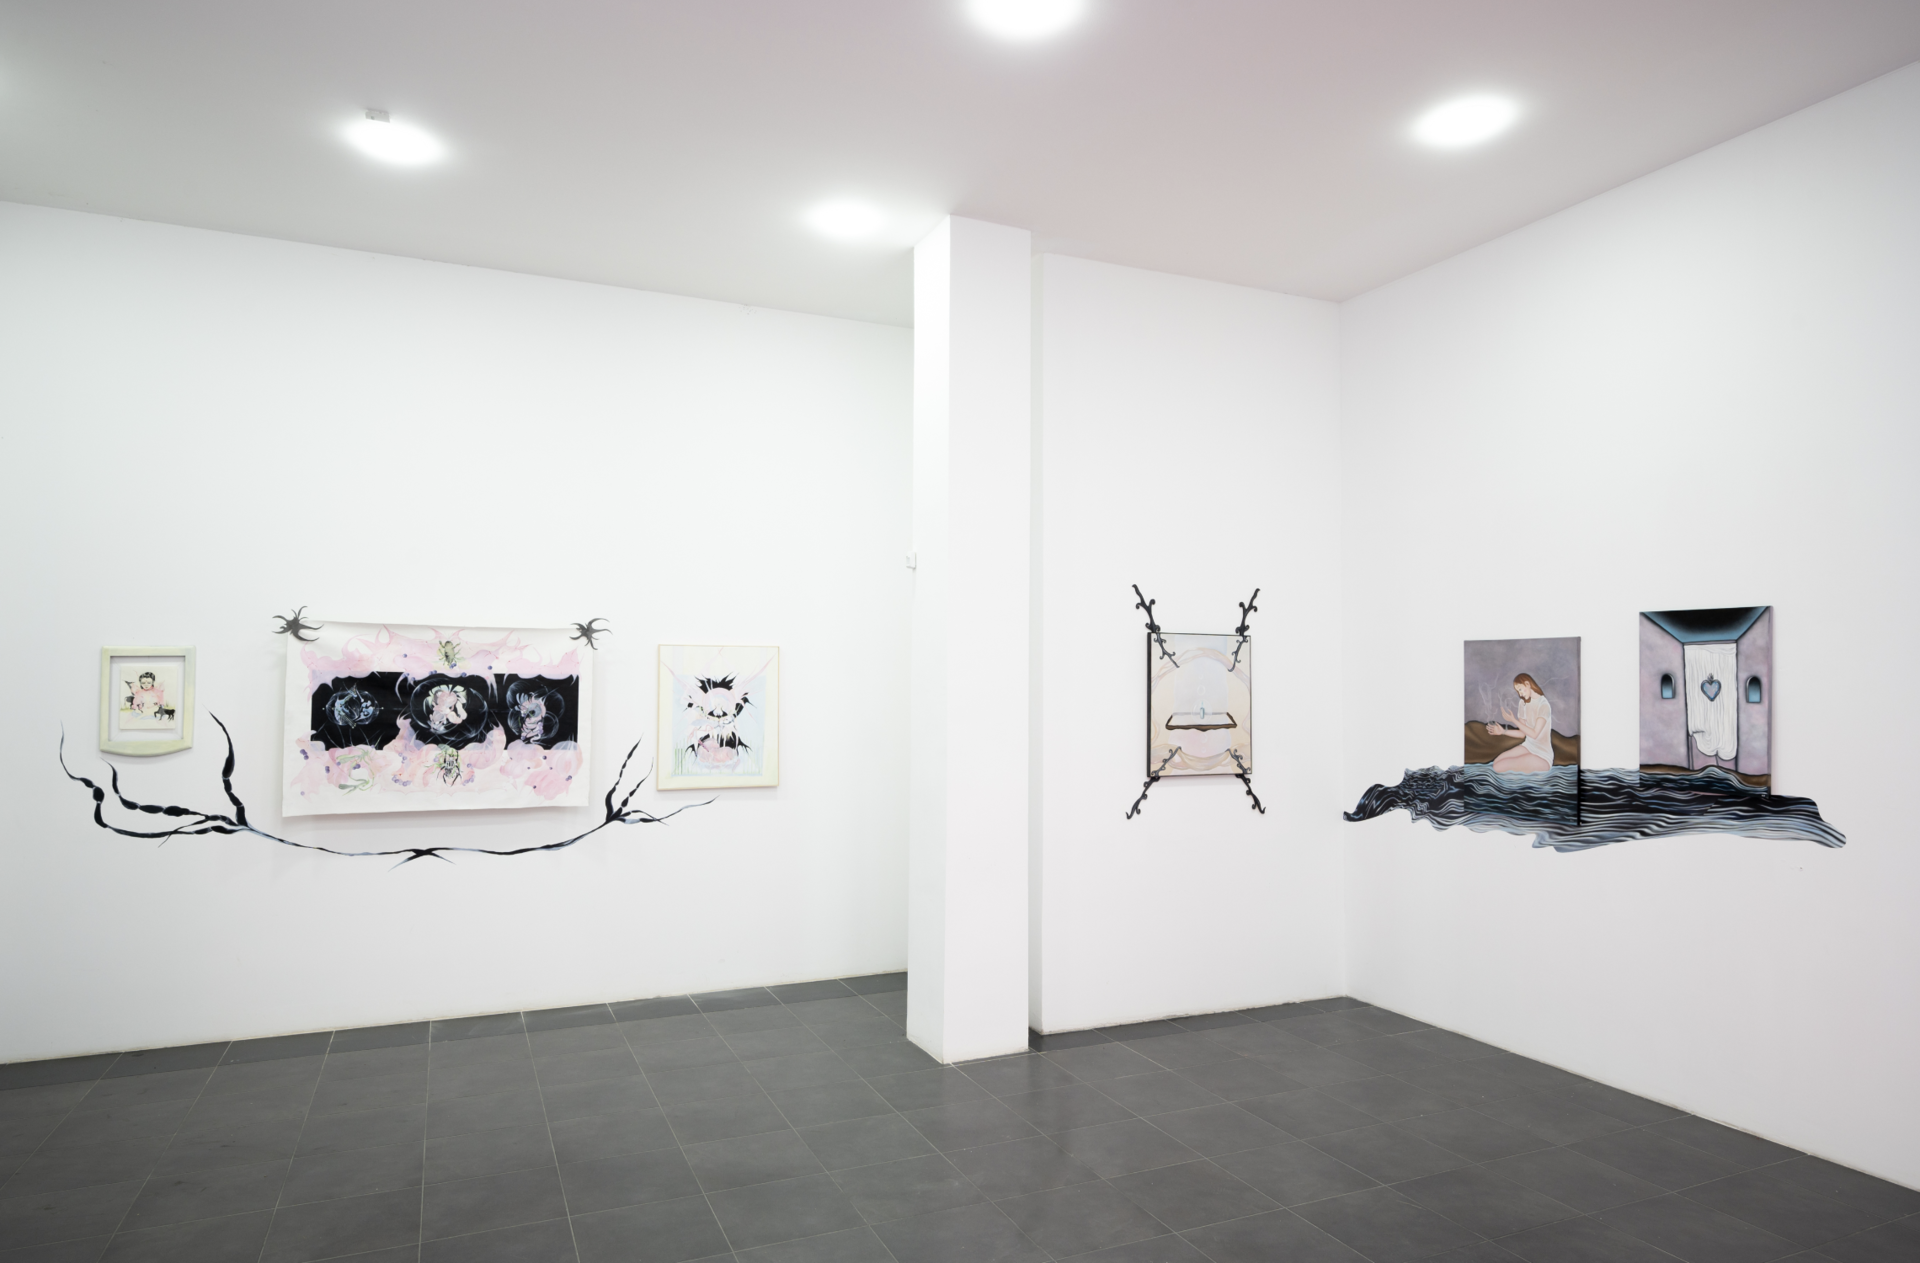 Sorry, no flowers here, installation view